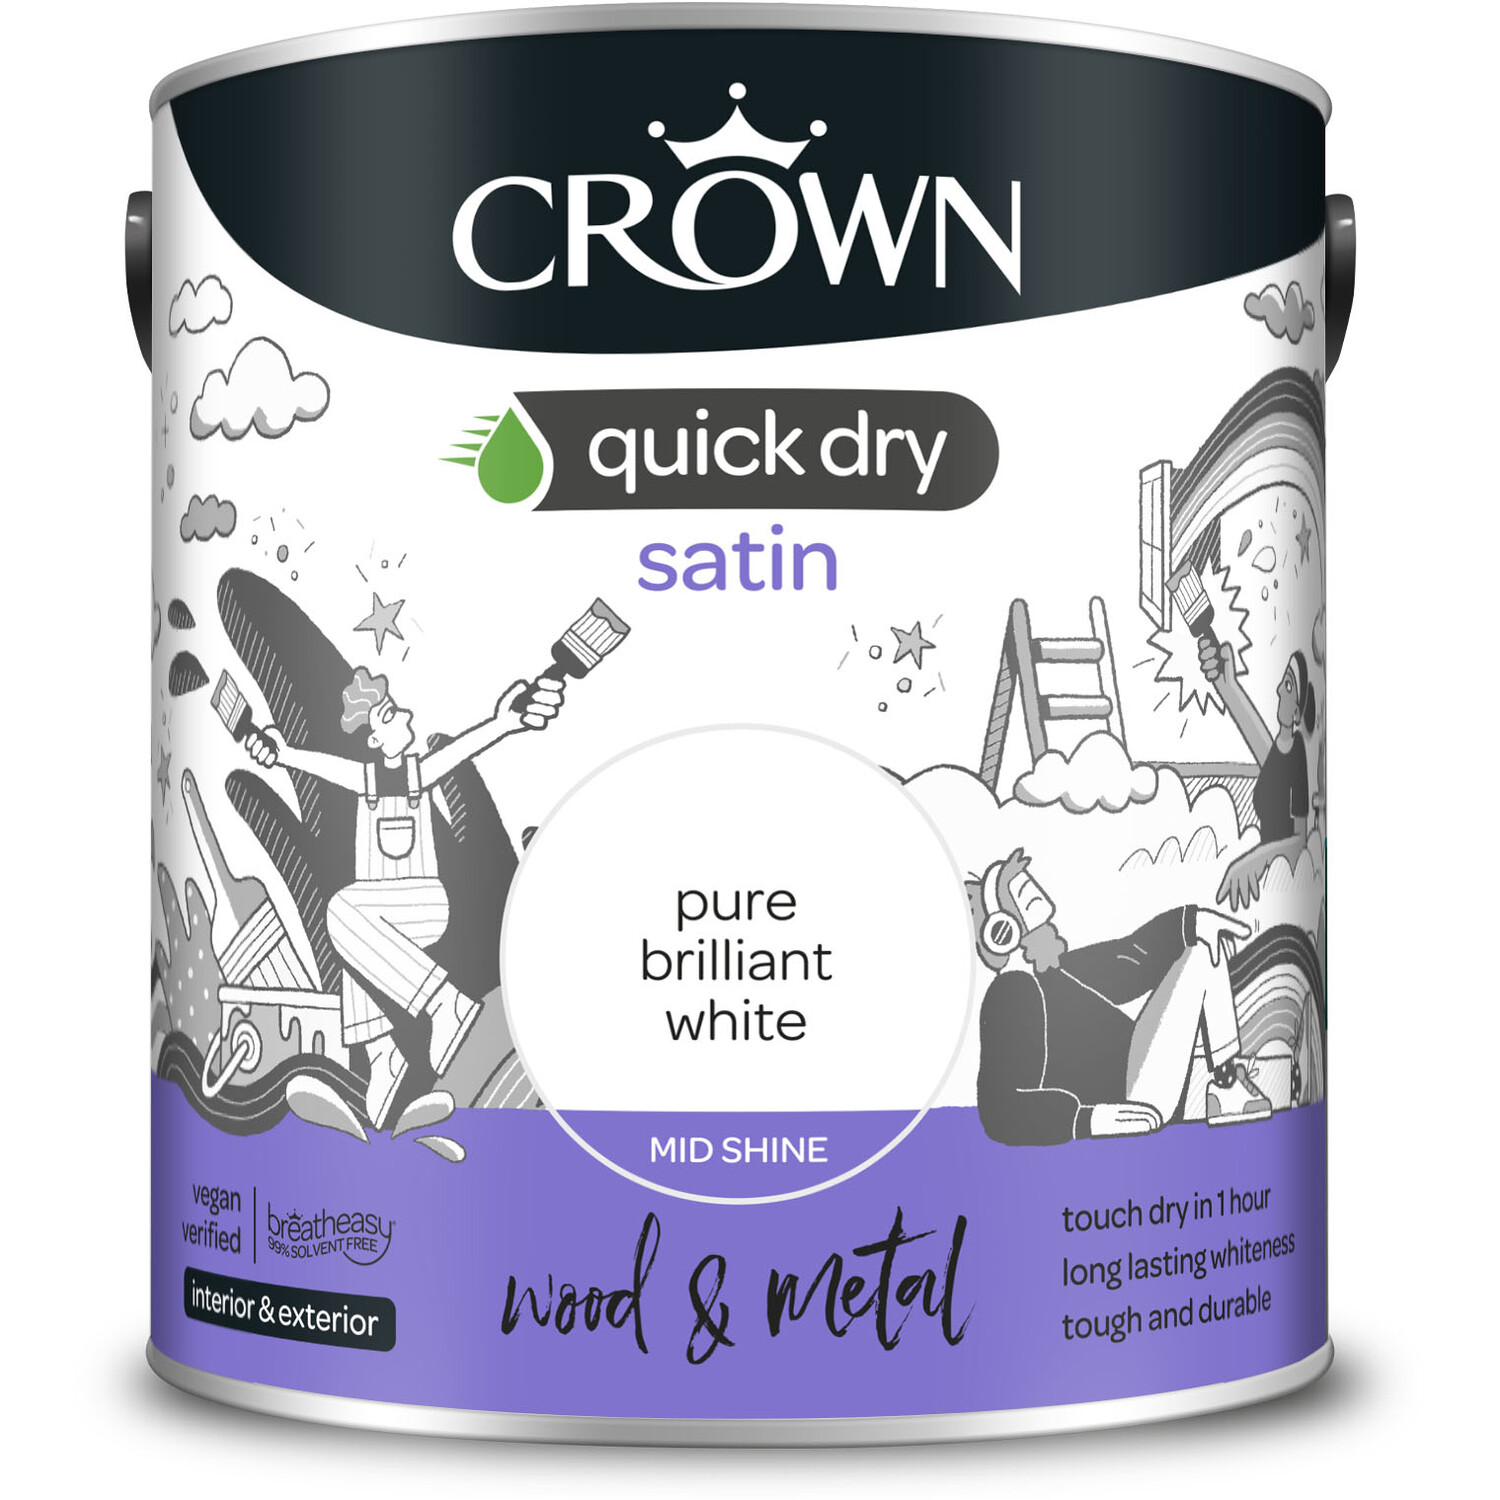 Crown Quick Dry Wood and Metal Pure Brilliant White Satin Paint 2.5L Image 2